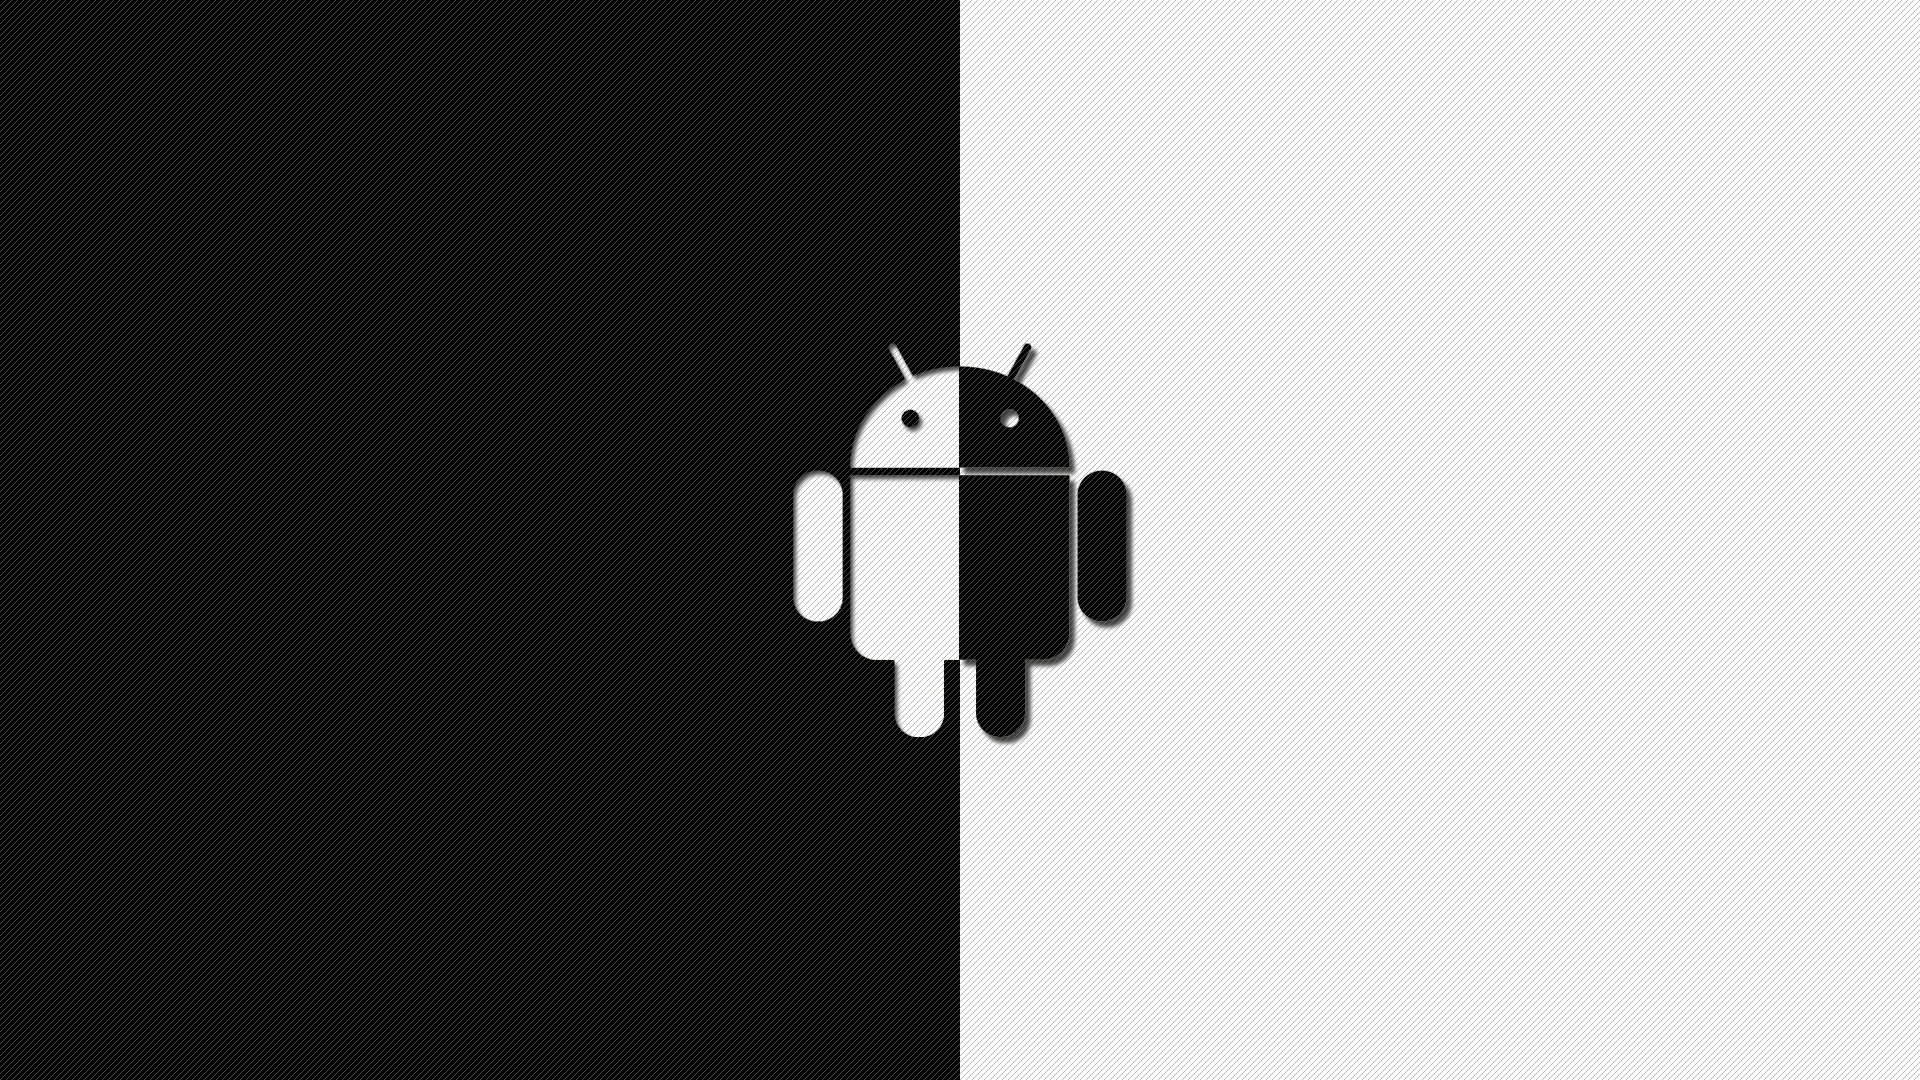 Android Wallpaper Black And White Wallpaper. beautyhdpics